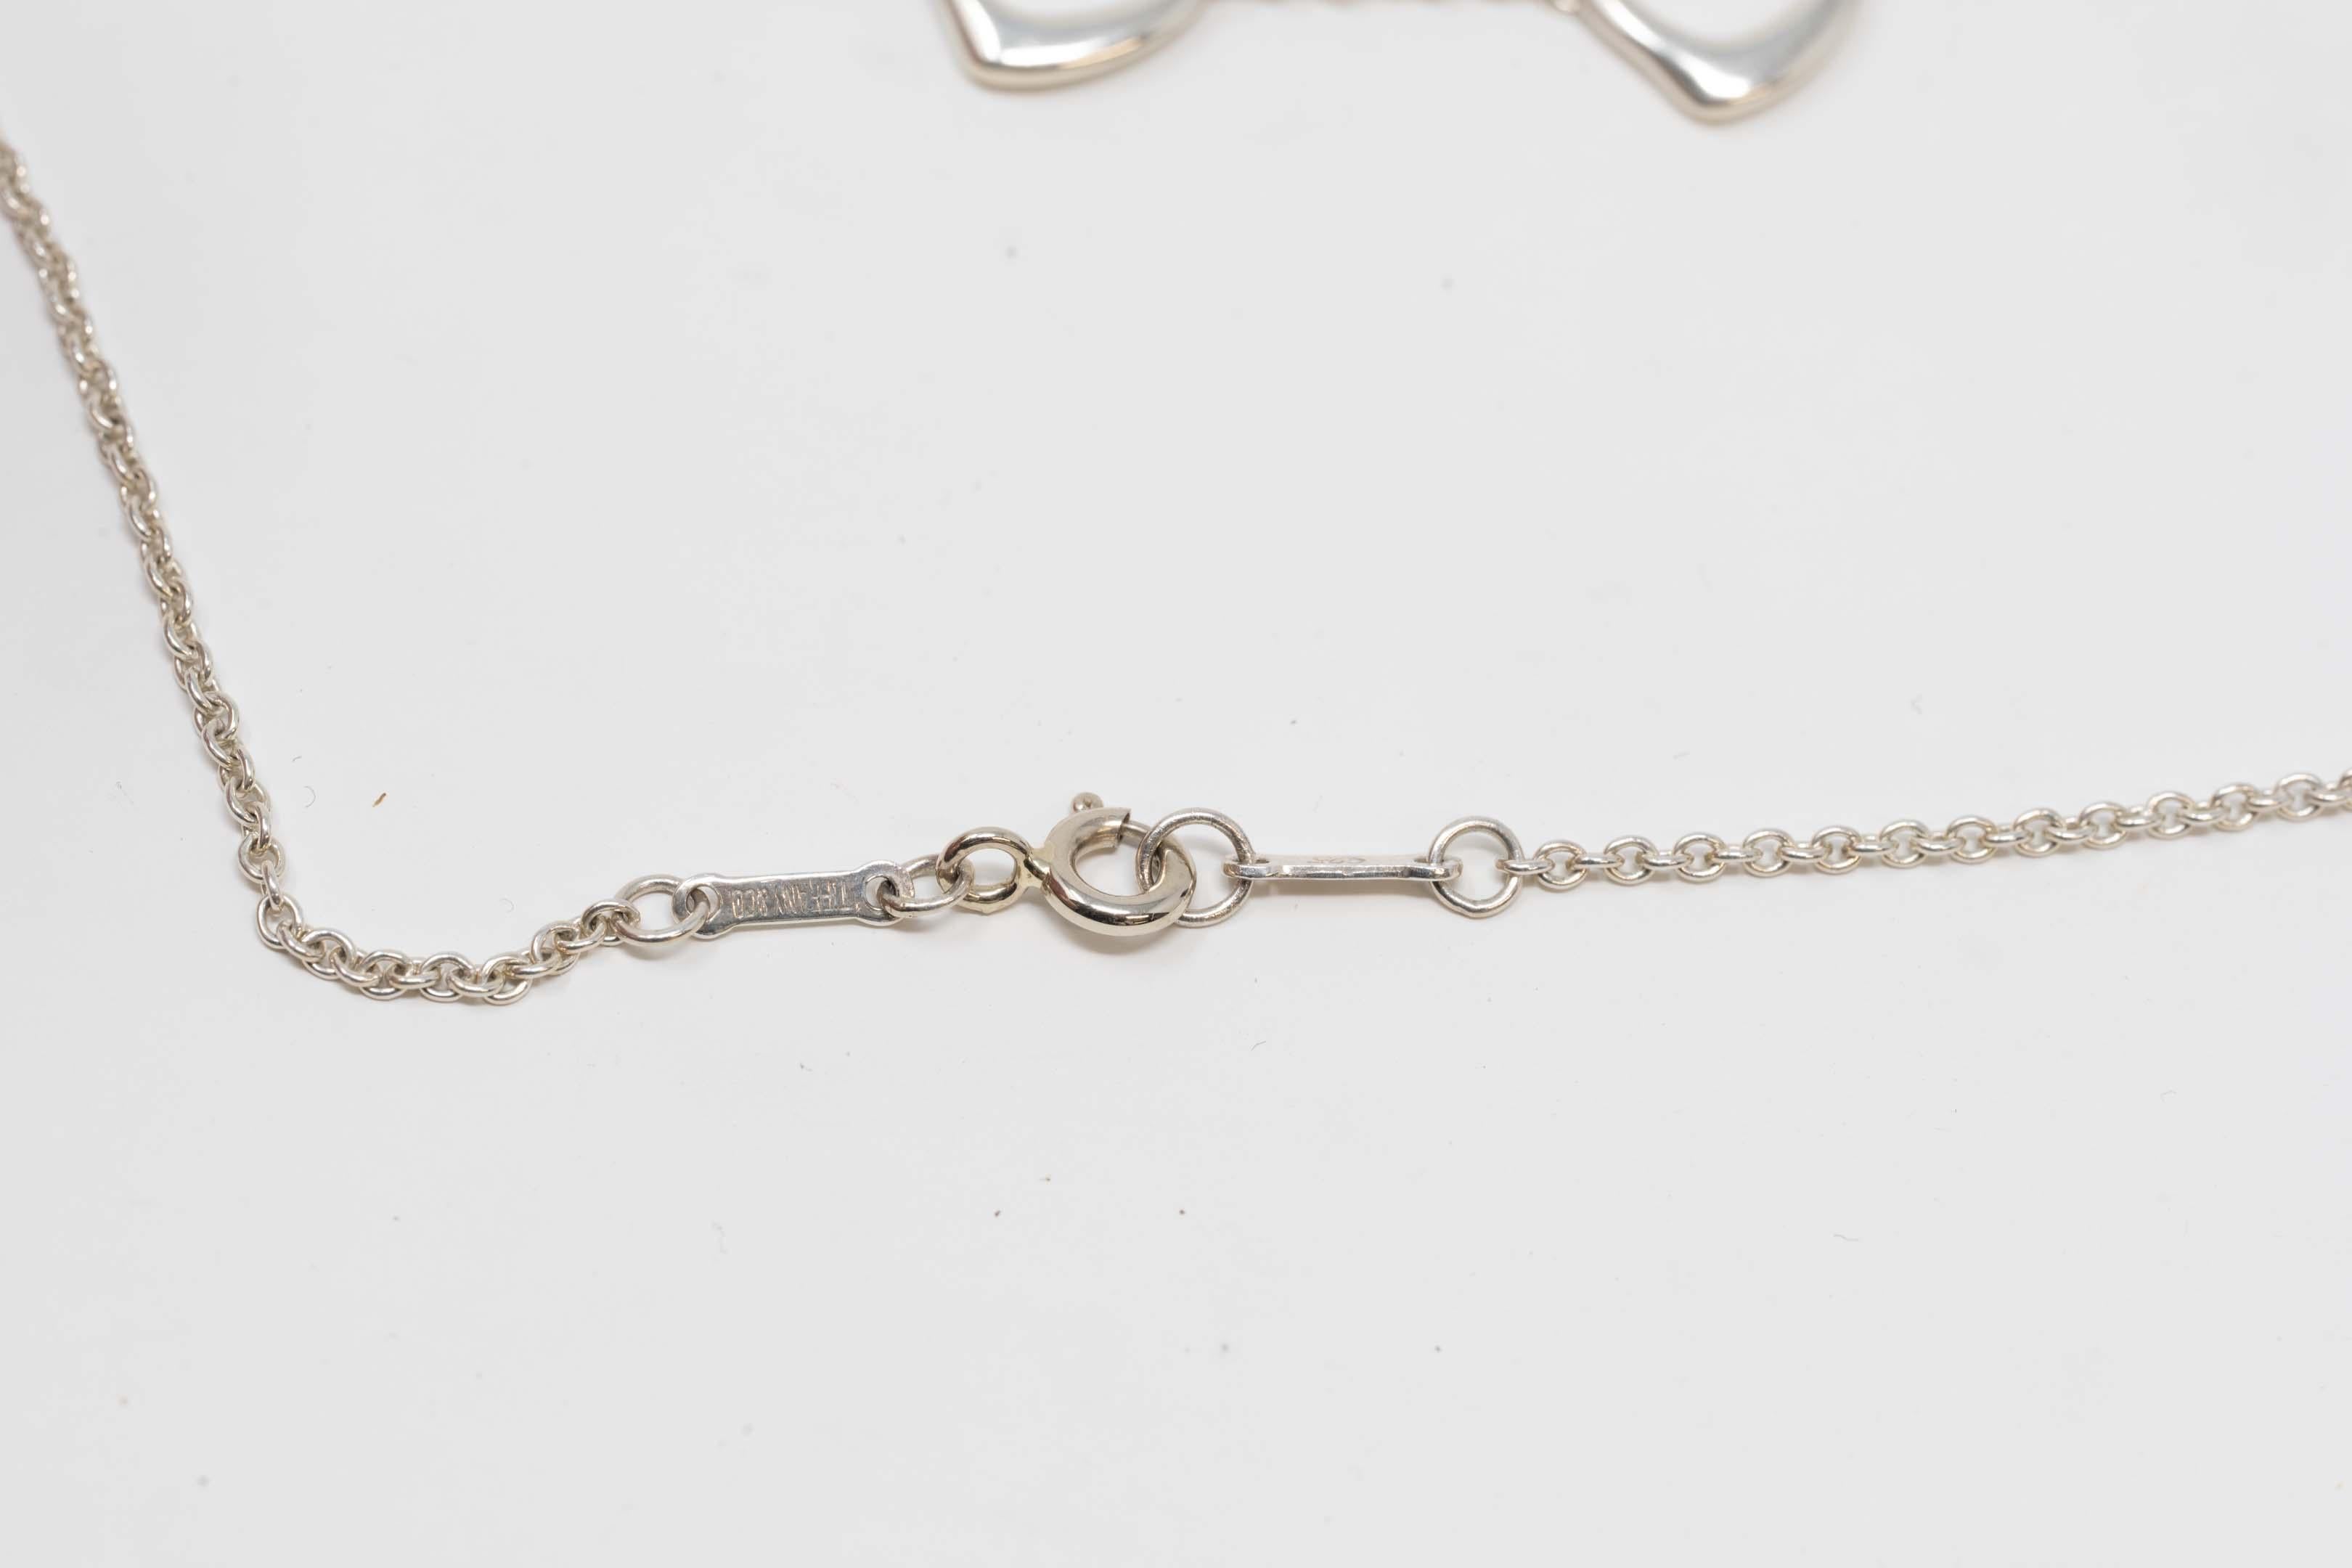 Tiffany & Co. Elsa Peretti Five Heart Silver Necklace In Good Condition For Sale In Montreal, QC